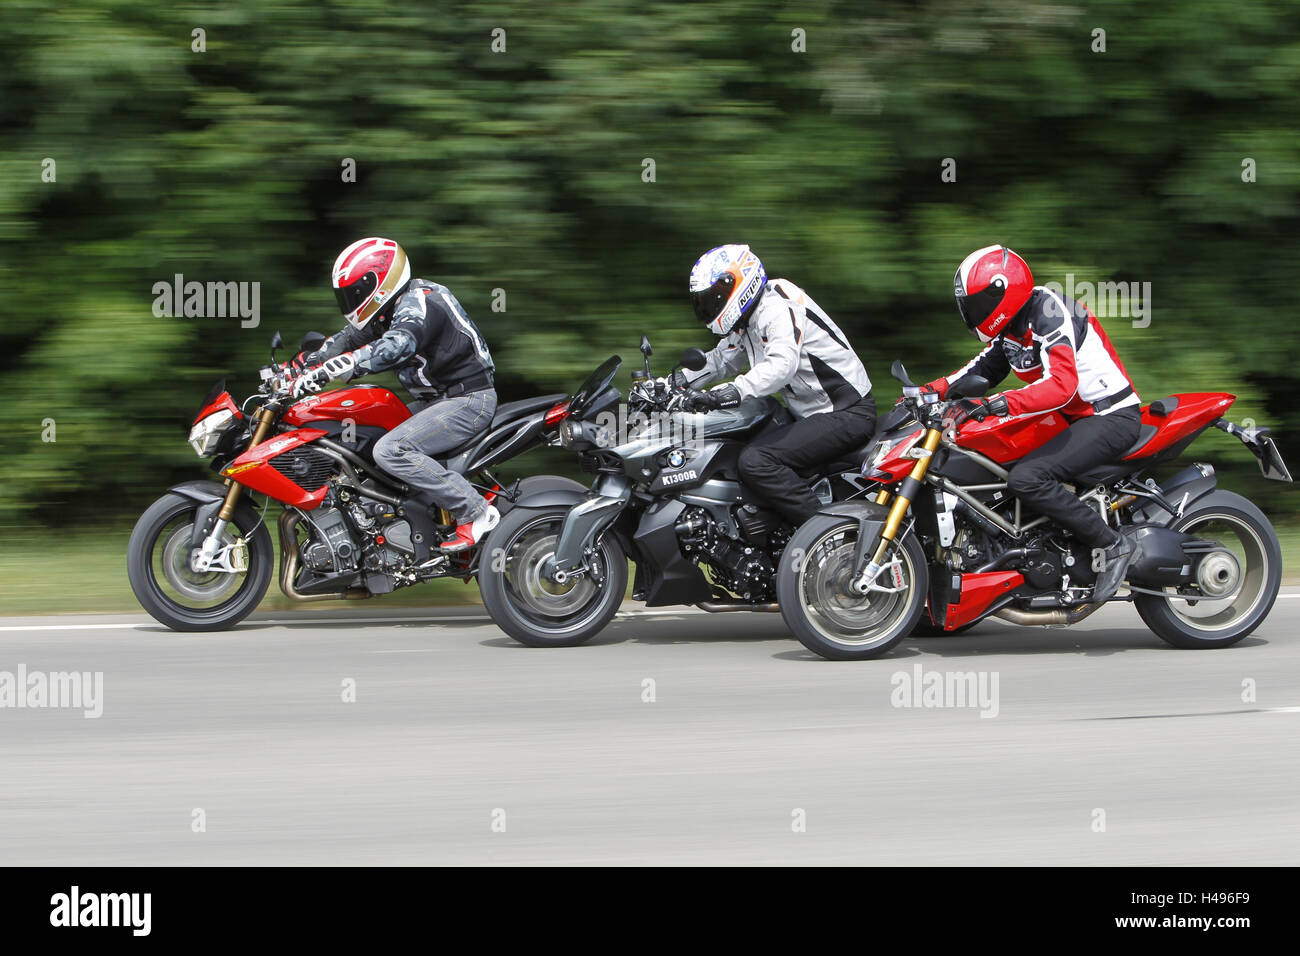 Motorcyclist, motorcycle, dolly shot, fun bikes, 3rd group, panning in front of wood, Stock Photo